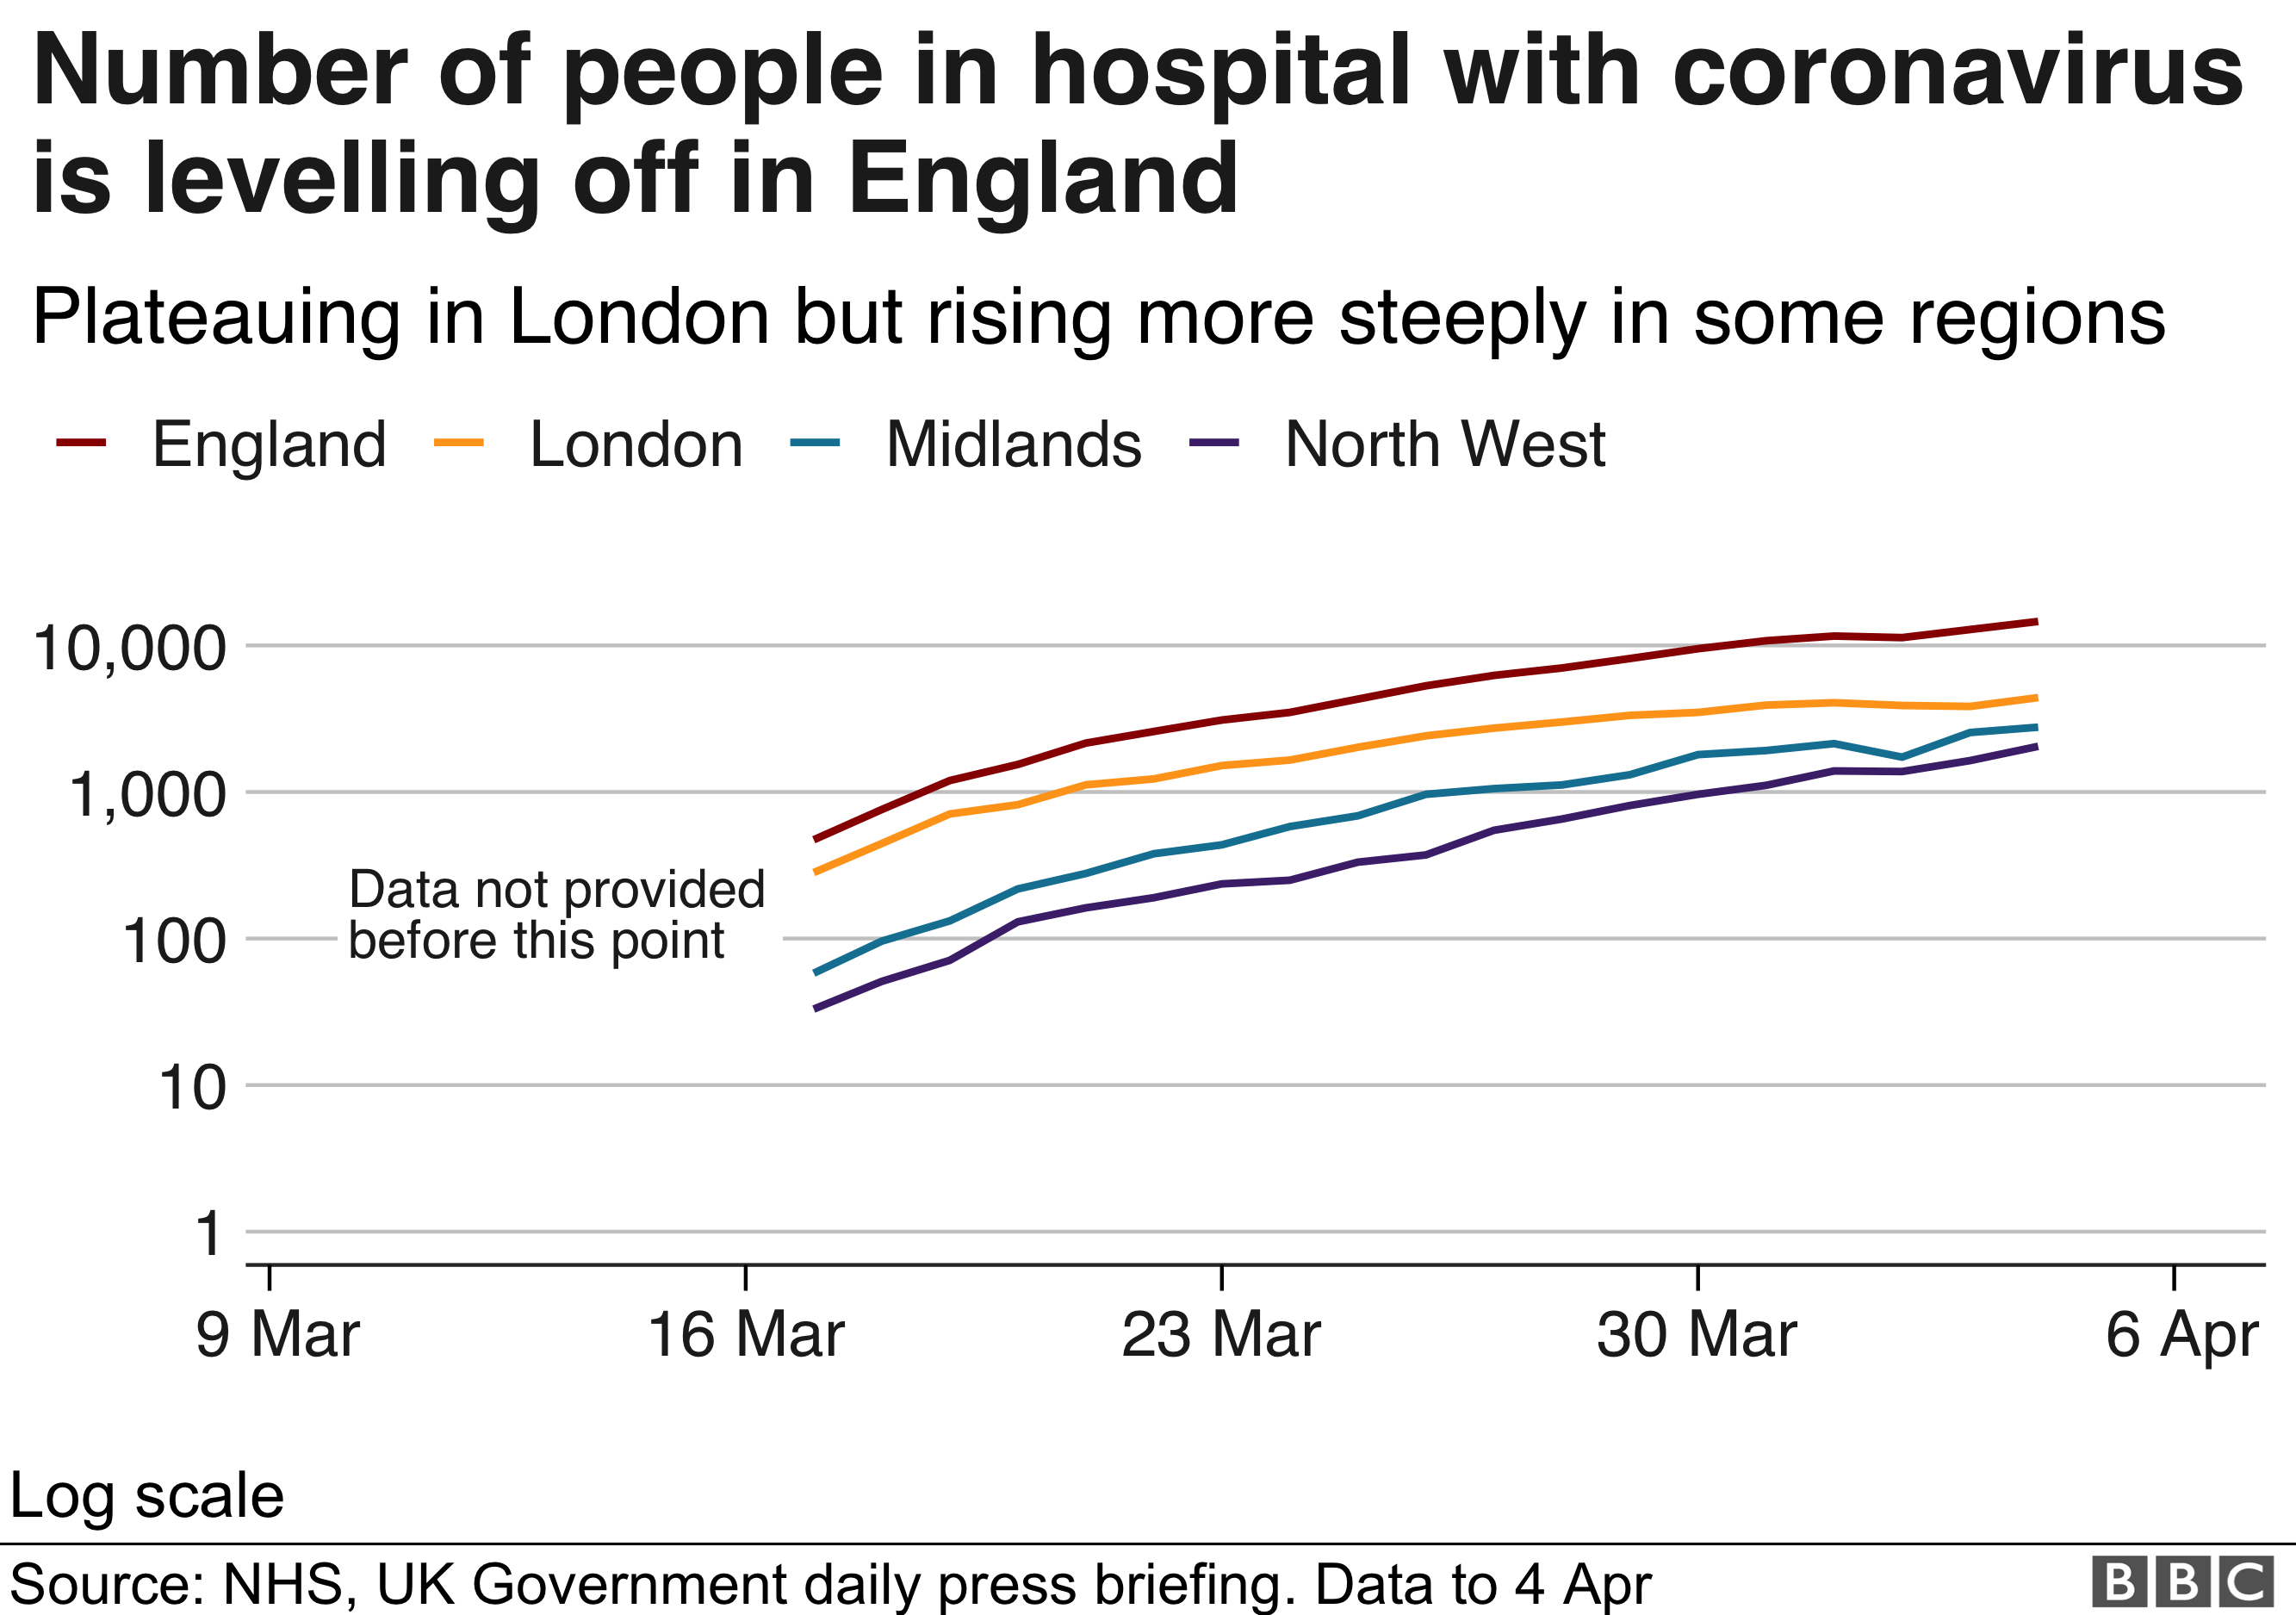 The number of people in hospital with coronavirus has slowed in England and plateaued in London